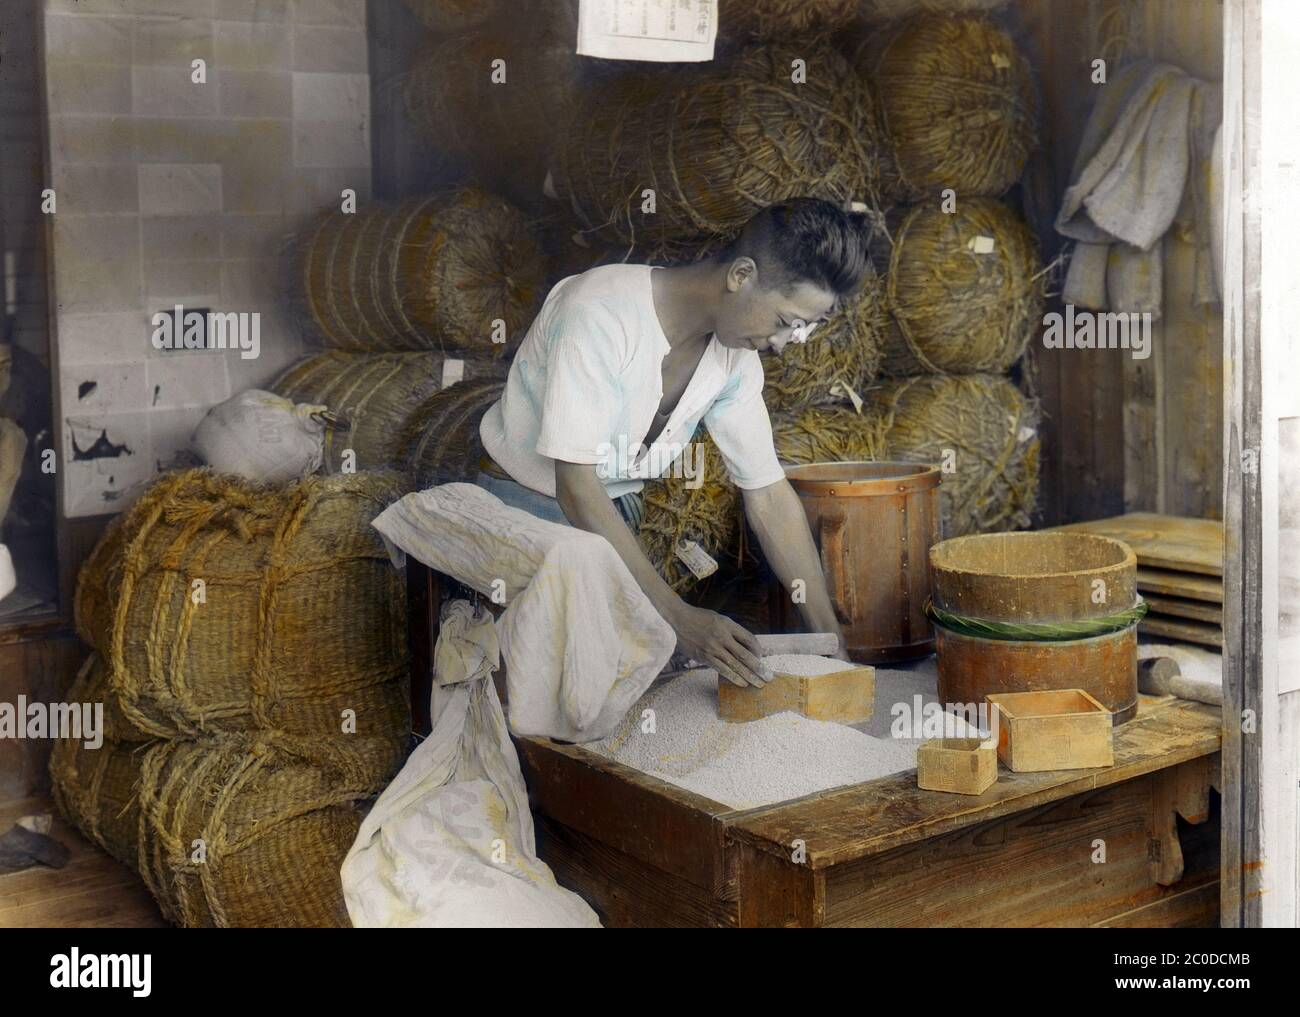 [ 1900s Japan - Japanese Rice Shop ] — A Japanese man measures rice at a rice shop with a square wooden box known as masu (枡 or 升). There are different sized mass on the table.  Behind him, many tawara (俵, straw rice bags) can be seen.  20th century vintage glass slide. Stock Photo